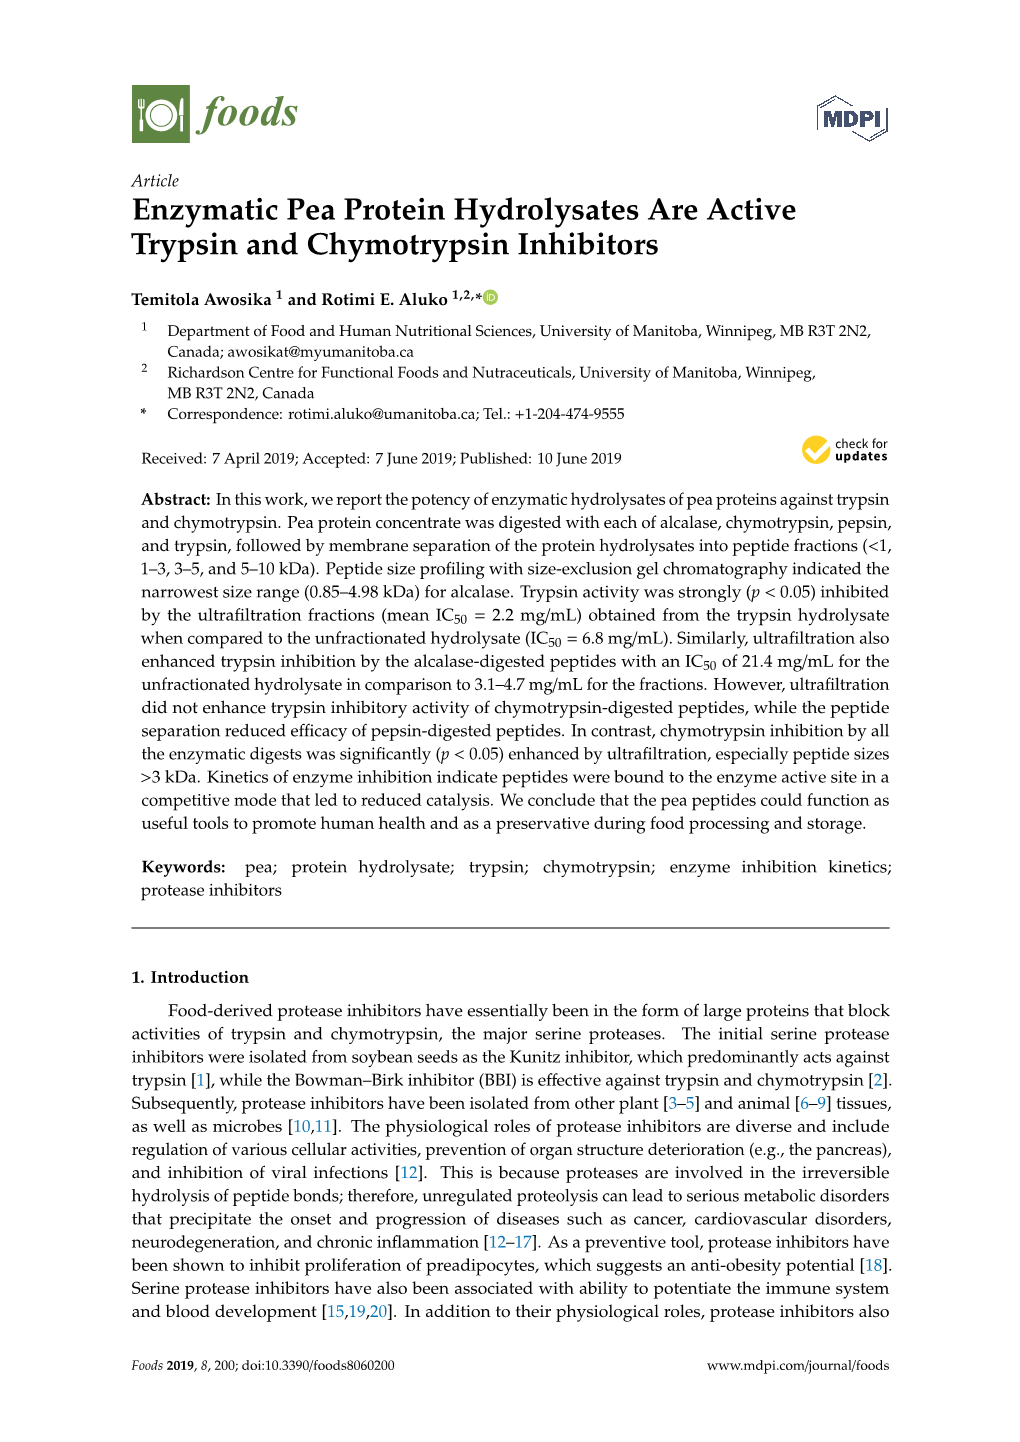 Enzymatic Pea Protein Hydrolysates Are Active Trypsin and Chymotrypsin Inhibitors